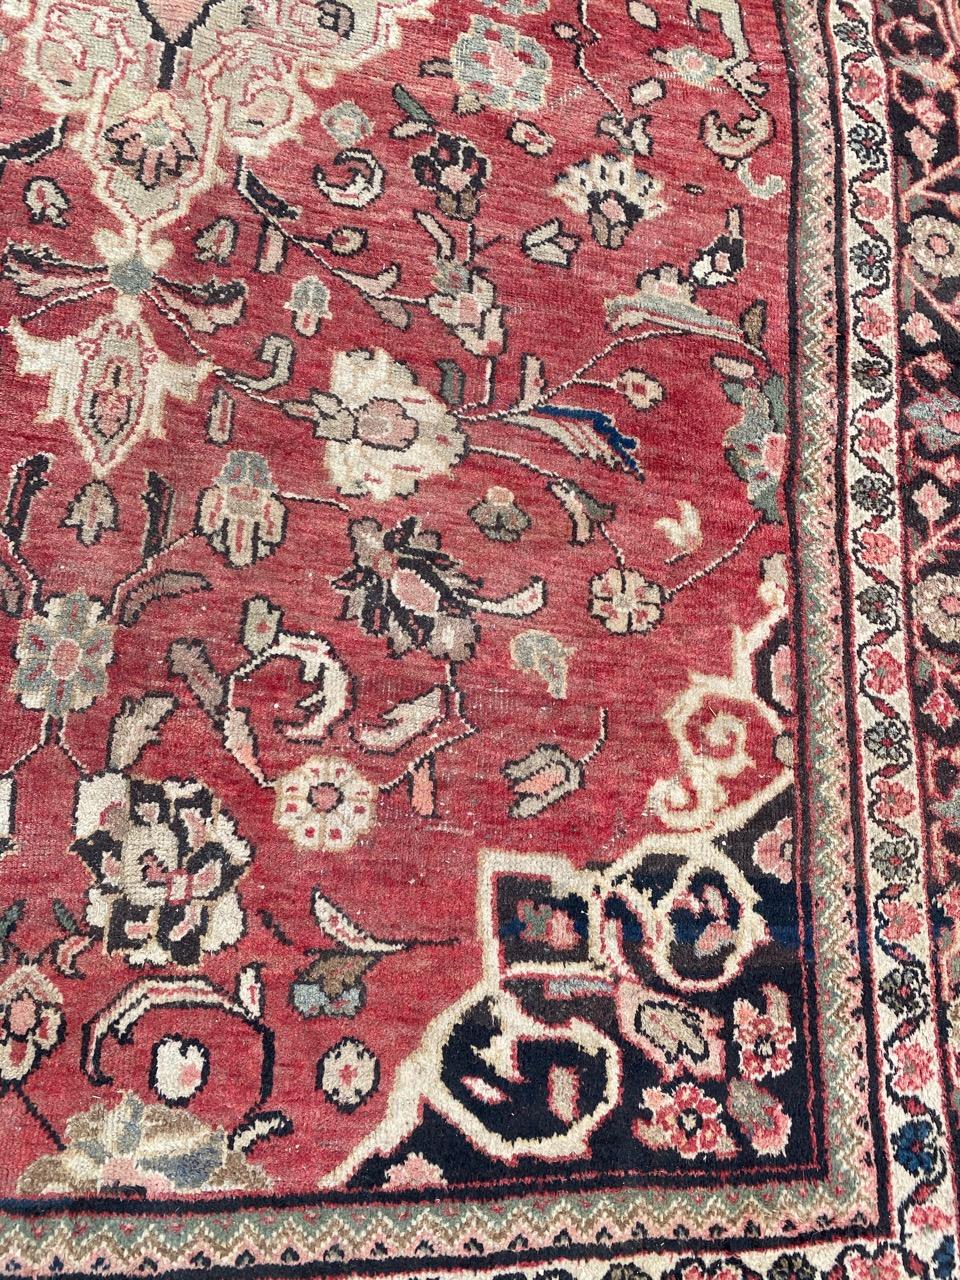 Beautiful Mahal rug with a floral central medallion design and beautiful colors with a red field, entirely hand knotted with wool velvet on cotton foundation.